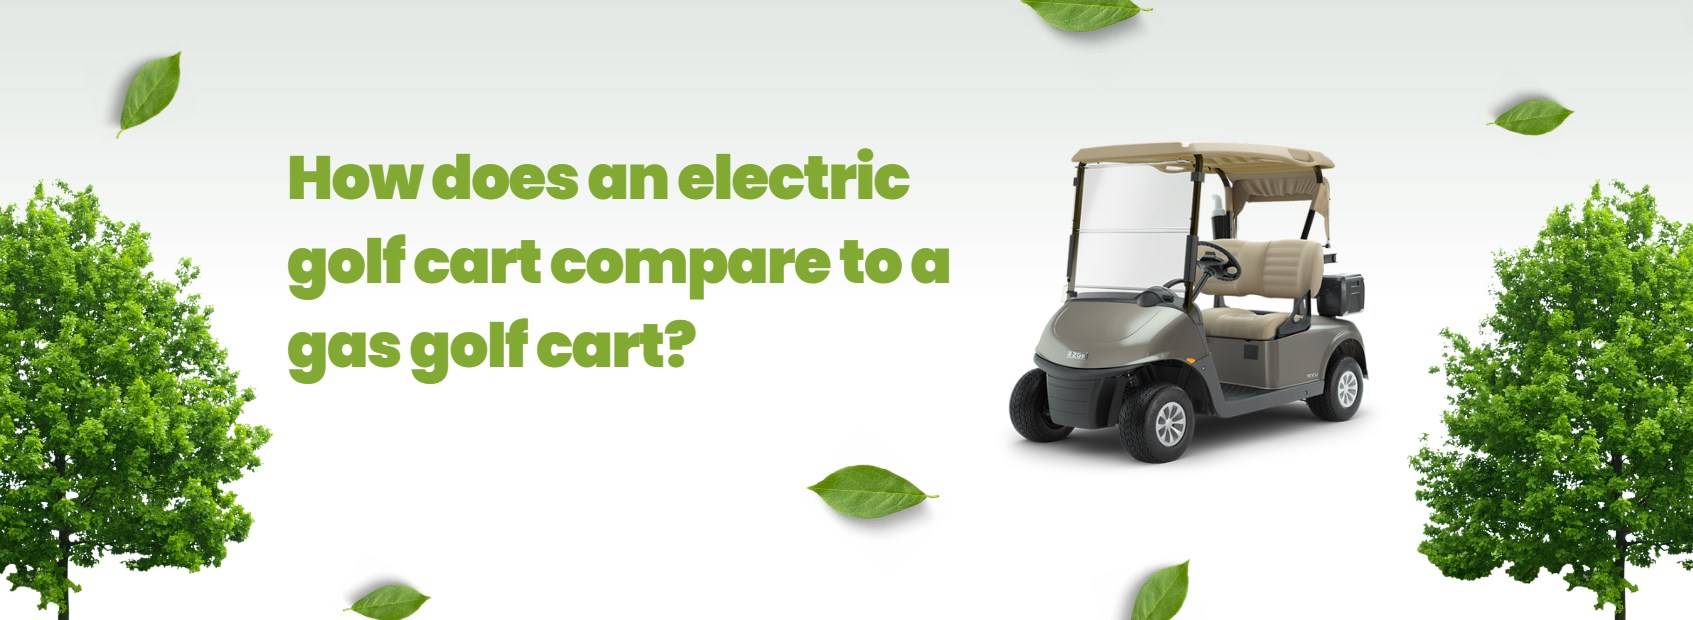 How does an electric golf cart compare to a gas golf cart?